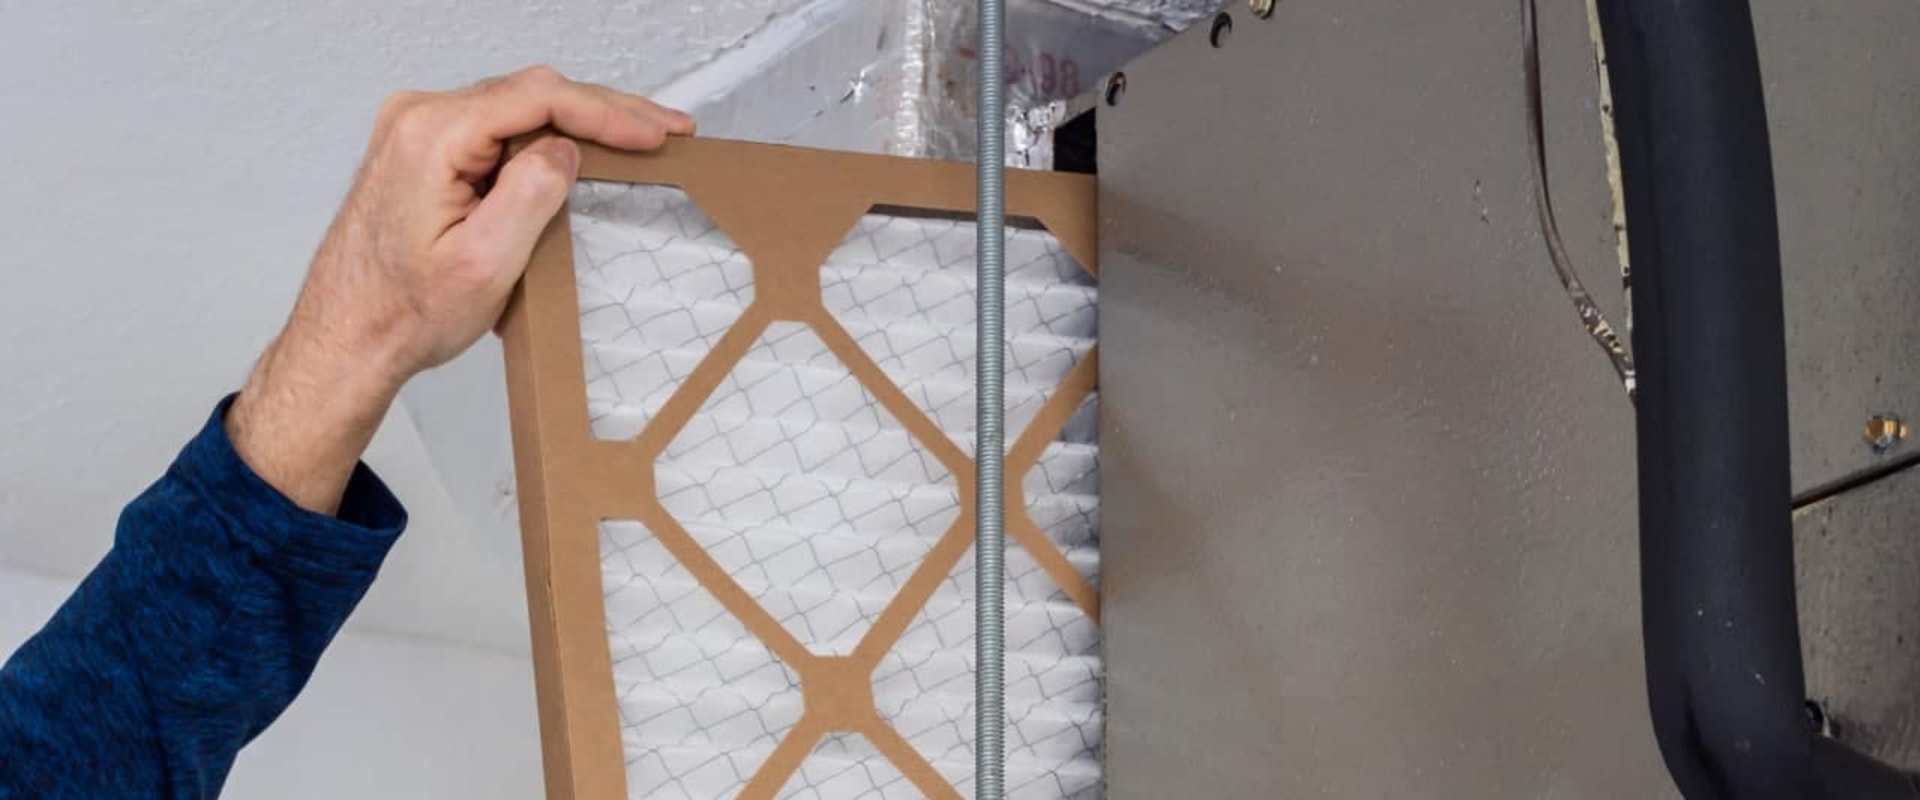 How Long Does a Furnace Air Filter Last? A Comprehensive Guide